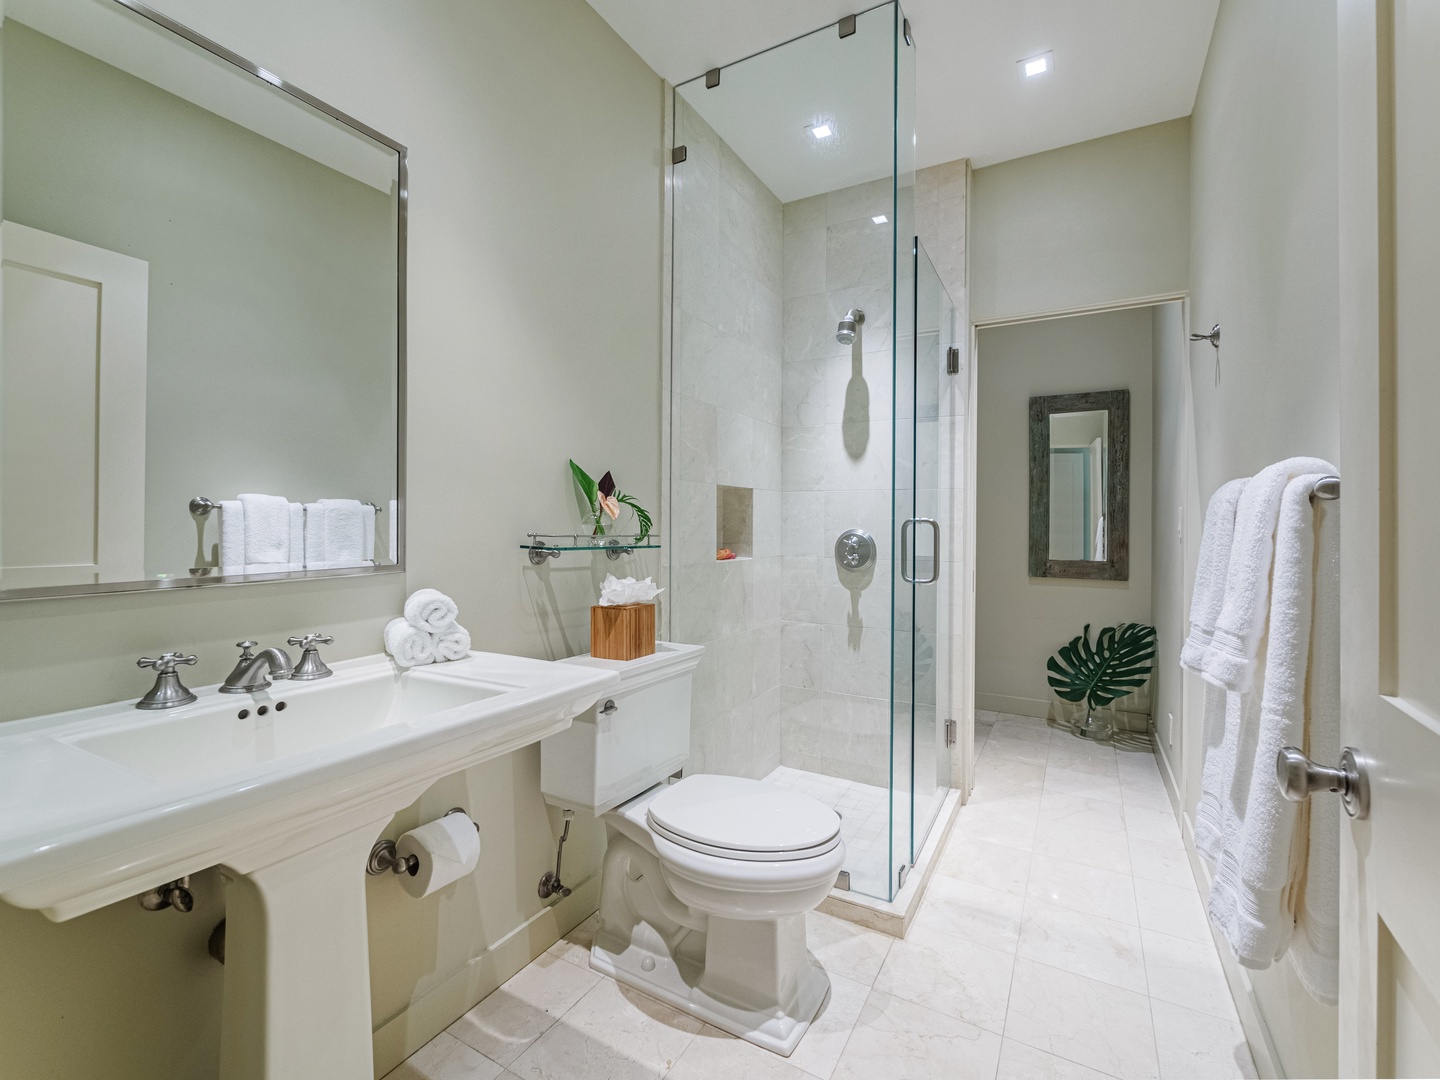 Honolulu Vacation Rentals, Paradise Beach Estate - Ensuite bathroom and a walk-in shower